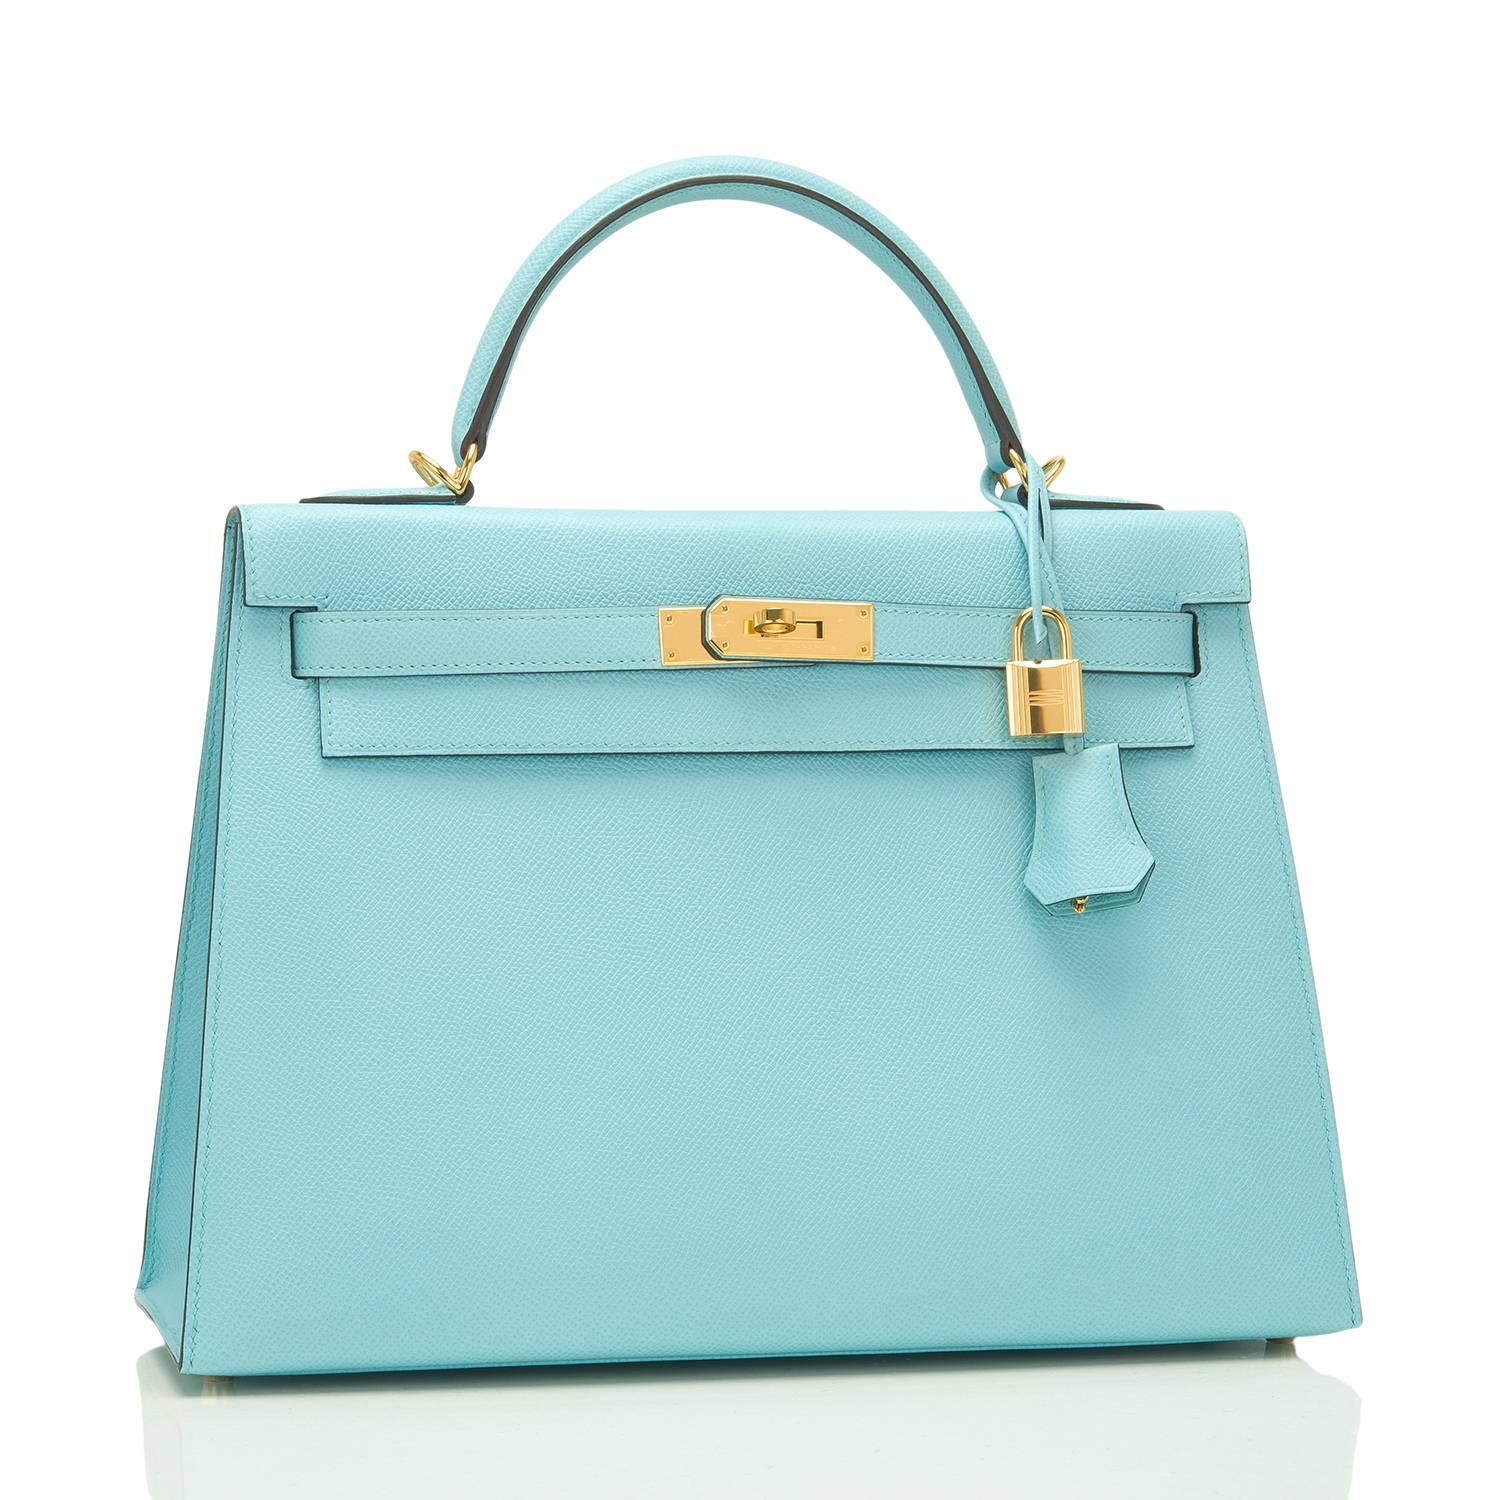 Hermes Blue Atoll Kelly 32cm of epsom leather with gold hardware.

This Kelly features tonal stitching, a front toggle closure, a clochette with lock and two keys and a single rolled handle.

The interior is lined with Blue Atoll chevre and has one